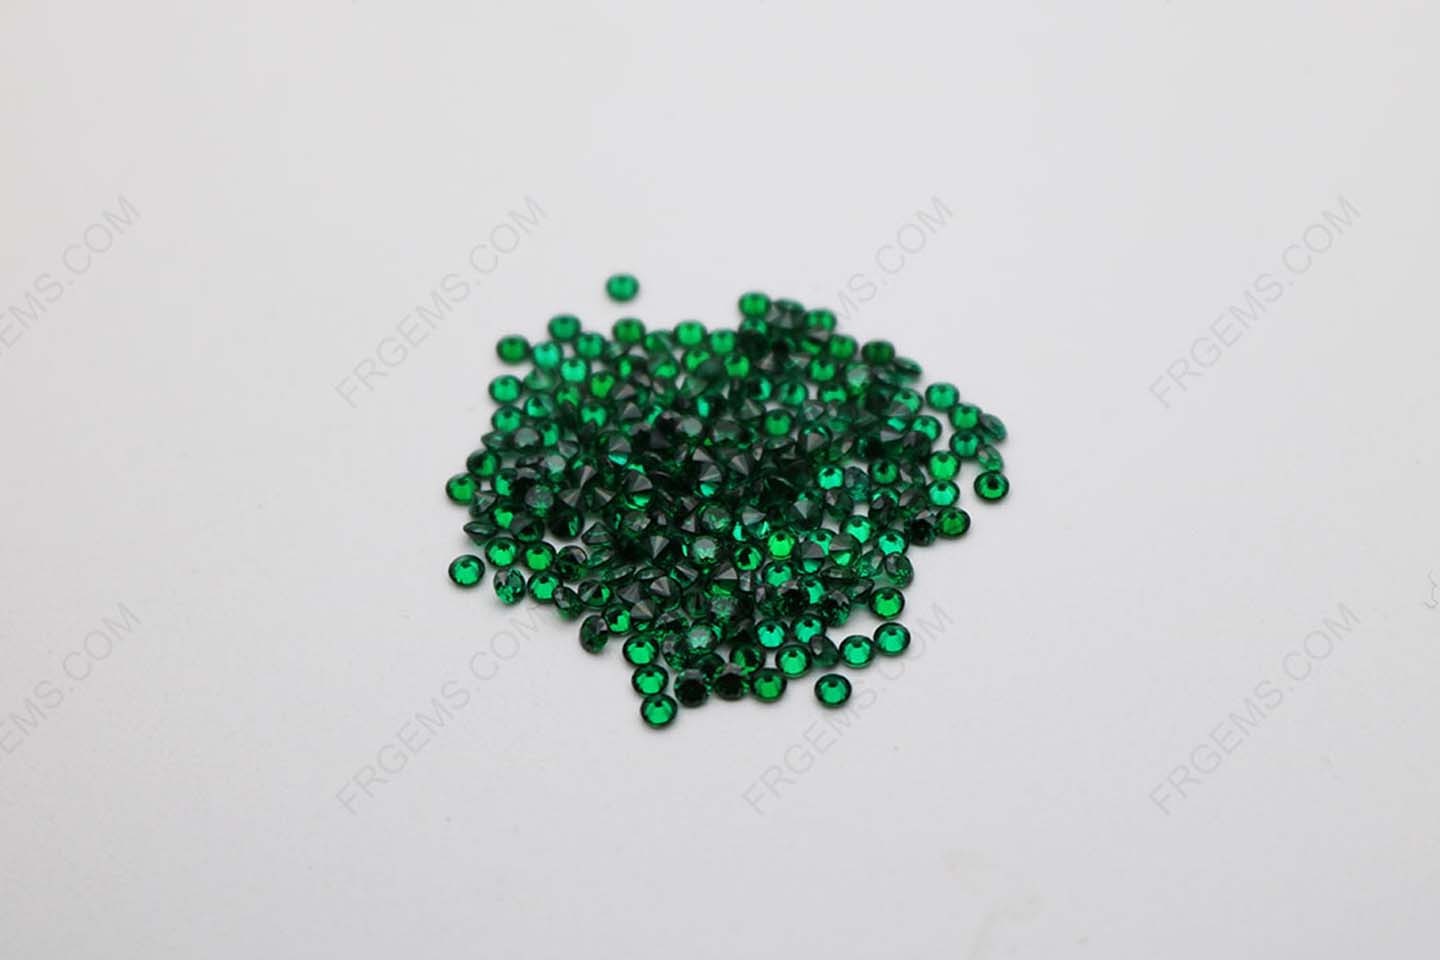 Cubic_Zirconia_Green_Round_diamond_Faceted_Cut_2.00mm_Melee_stones_IMG_1009